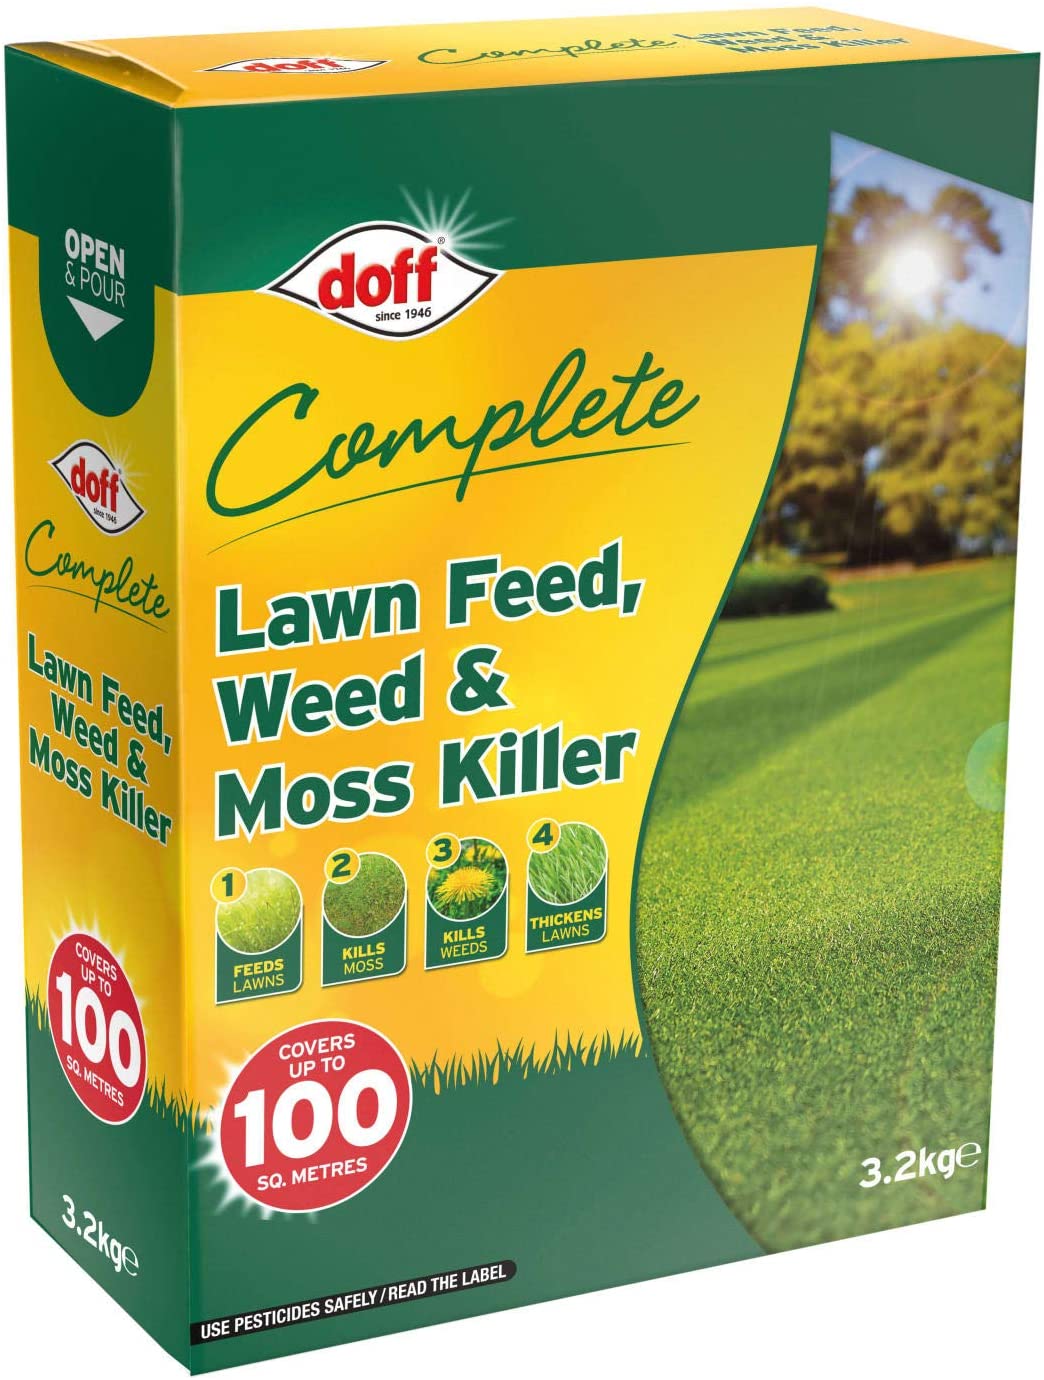 DOFF 3.2kg Complete Lawn Feed, Weed & Moss Killer 3.2kg